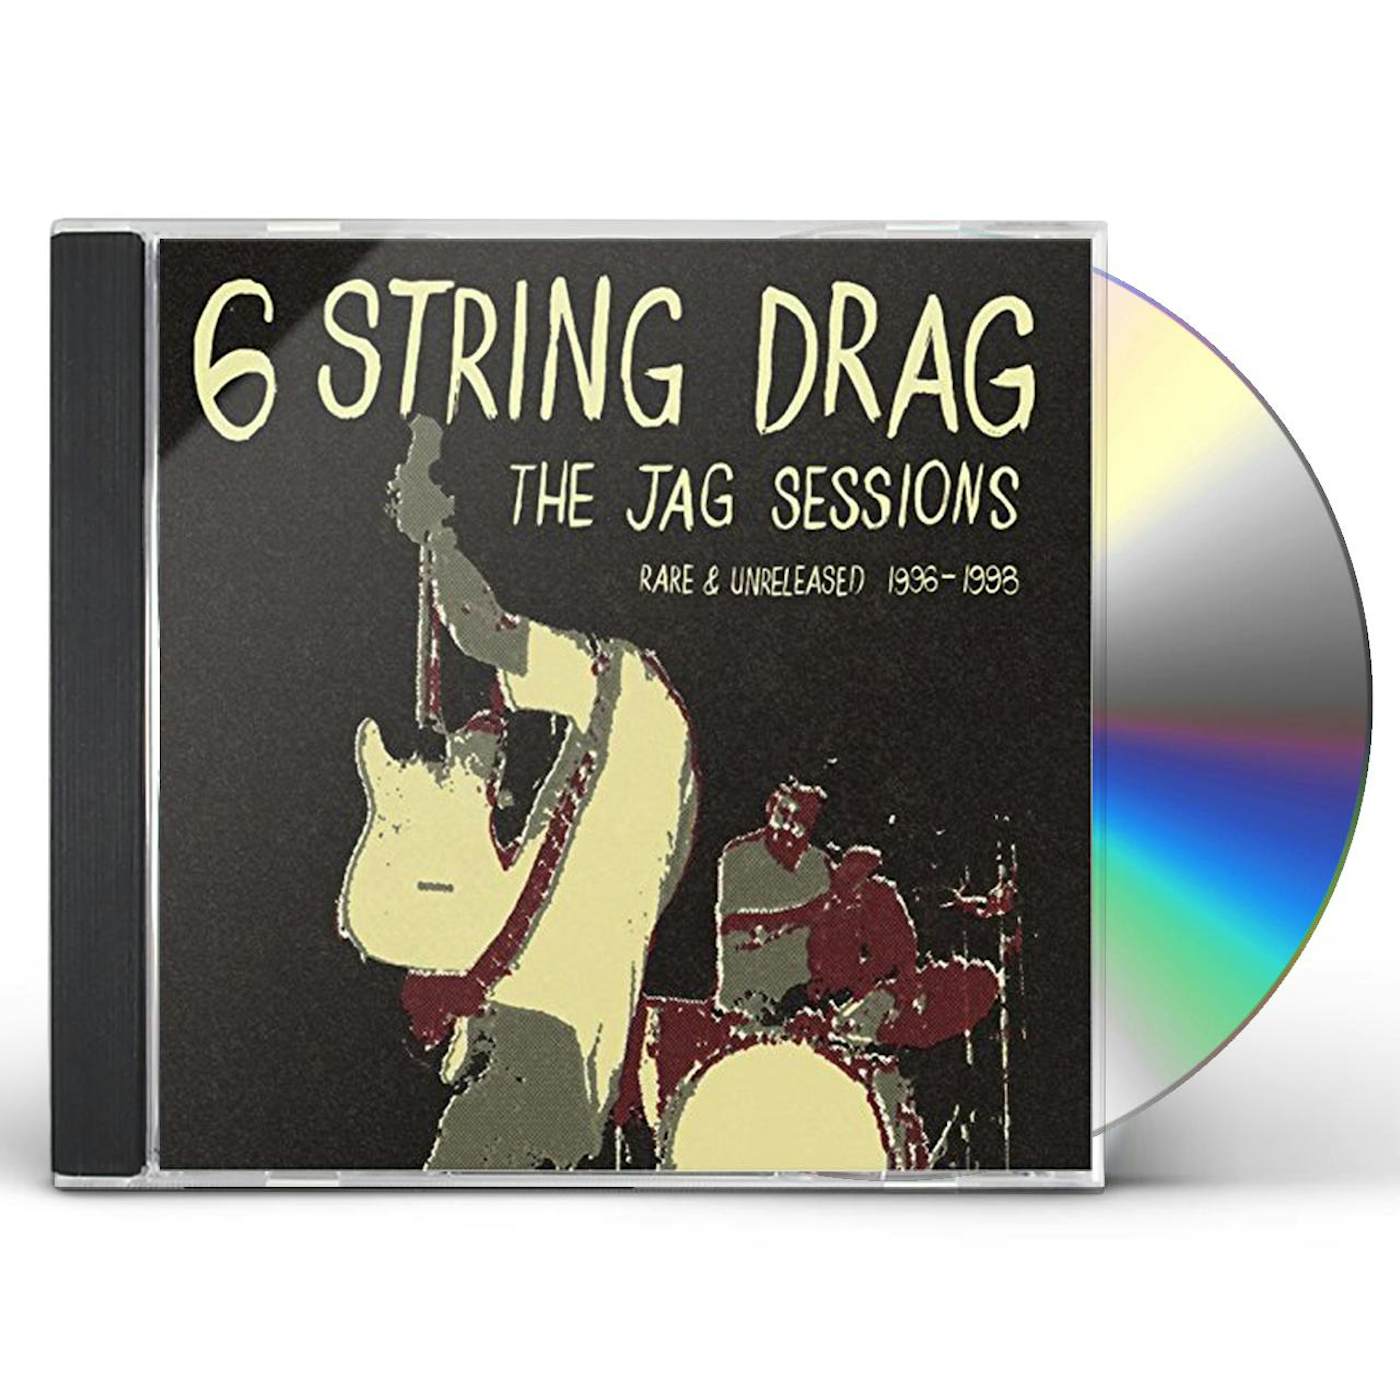 6 String Drag JAG SESSIONS: RARE & UNRELEASED 1996-1998 CD